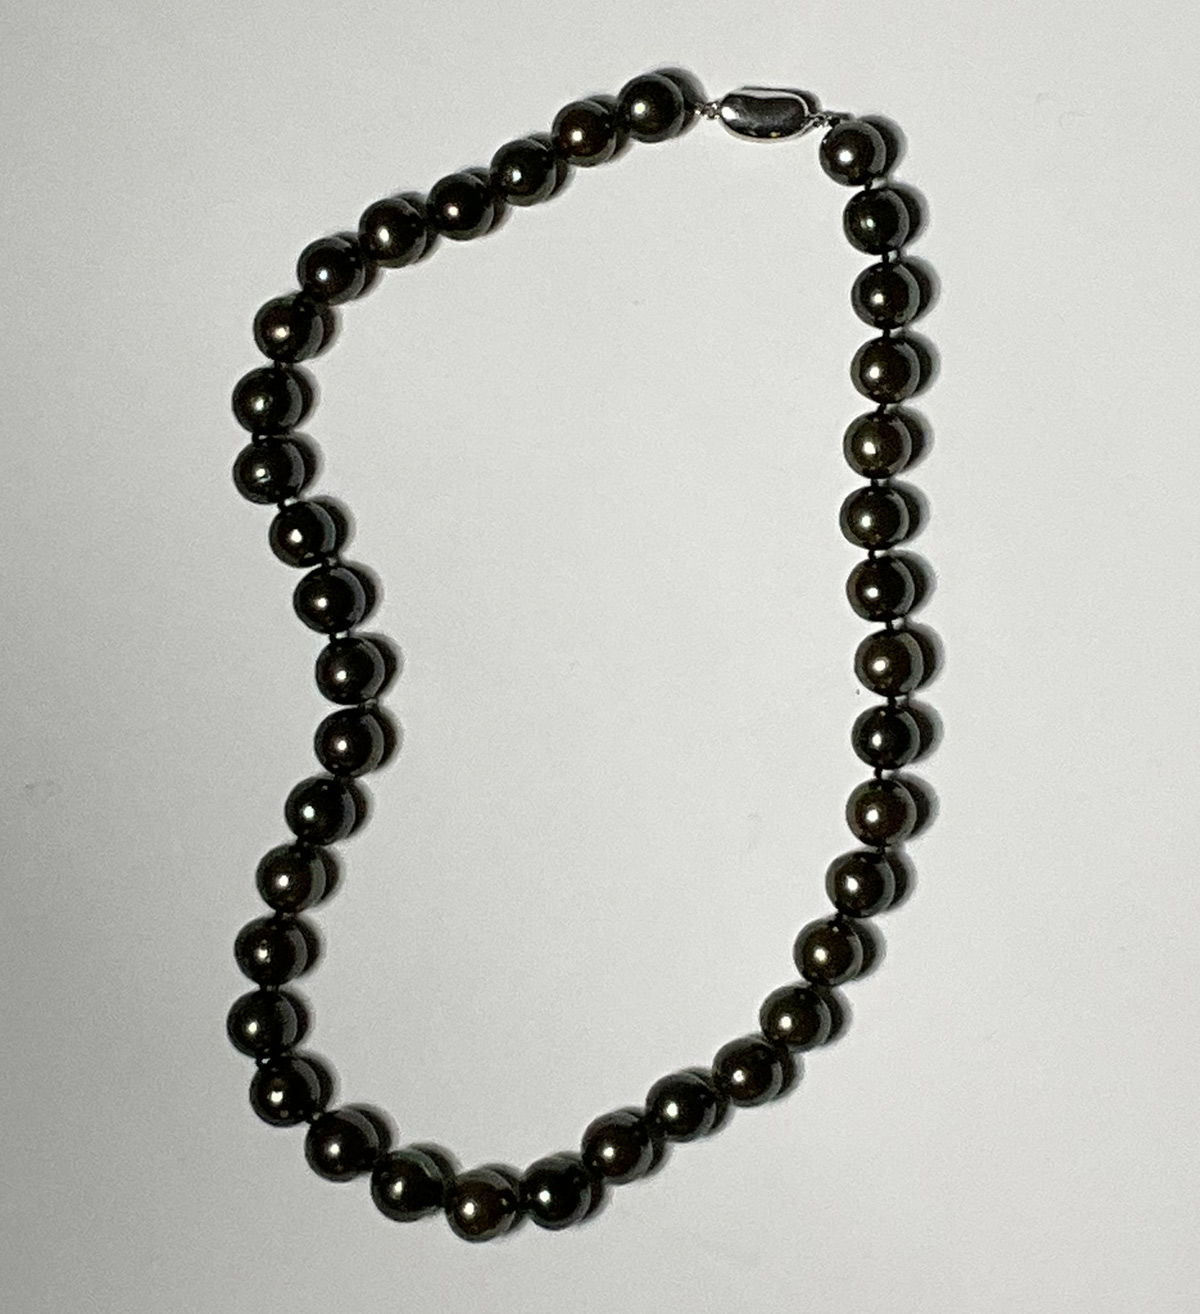 Sophisticated Clustered Freshwater Black Pearls Crystals on Silk Thread  Necklace | eBay